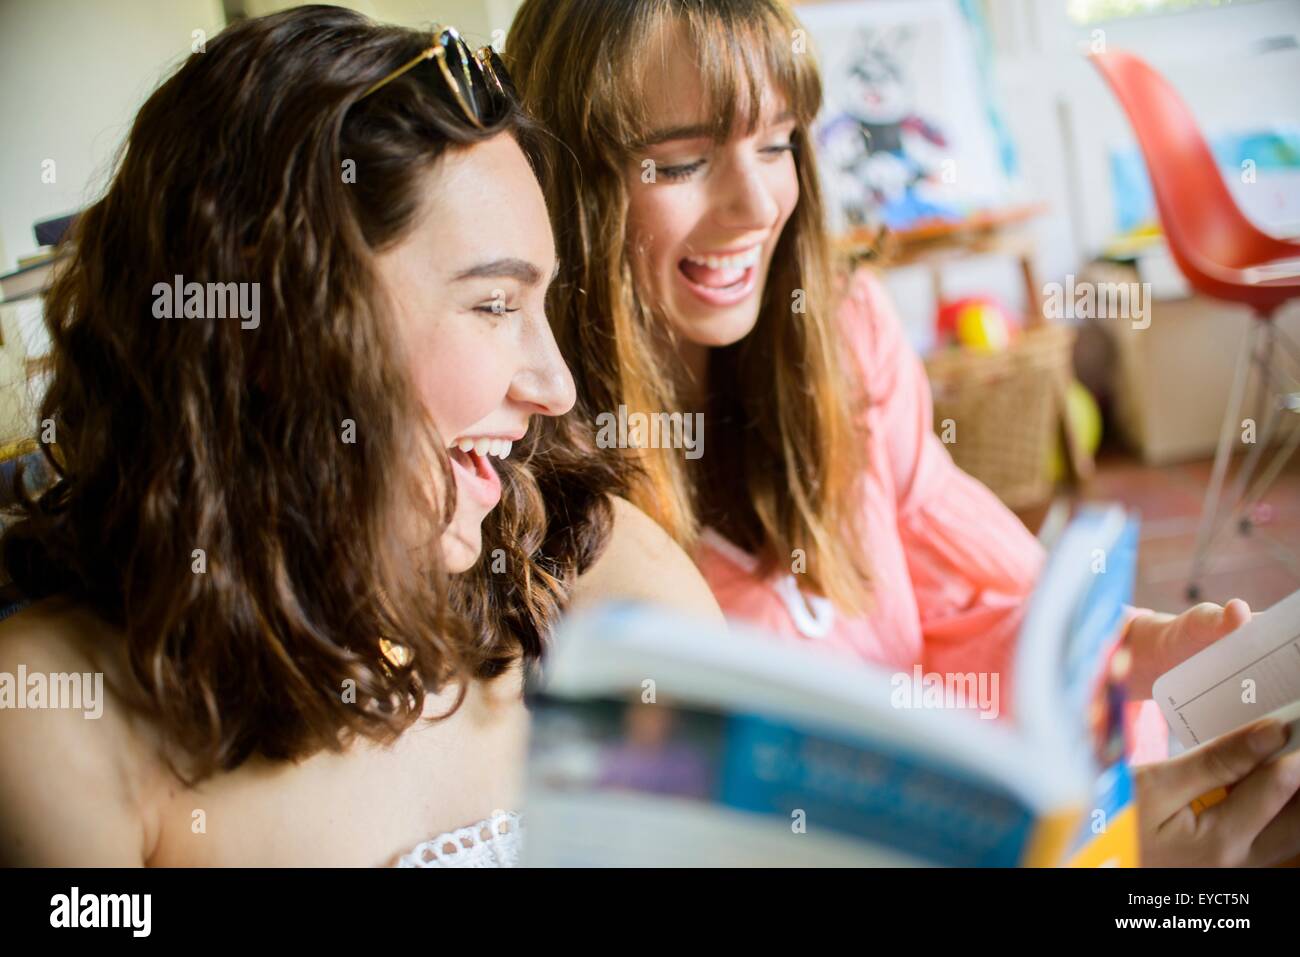 Two young female friends browsing and laughing at books Stock Photo